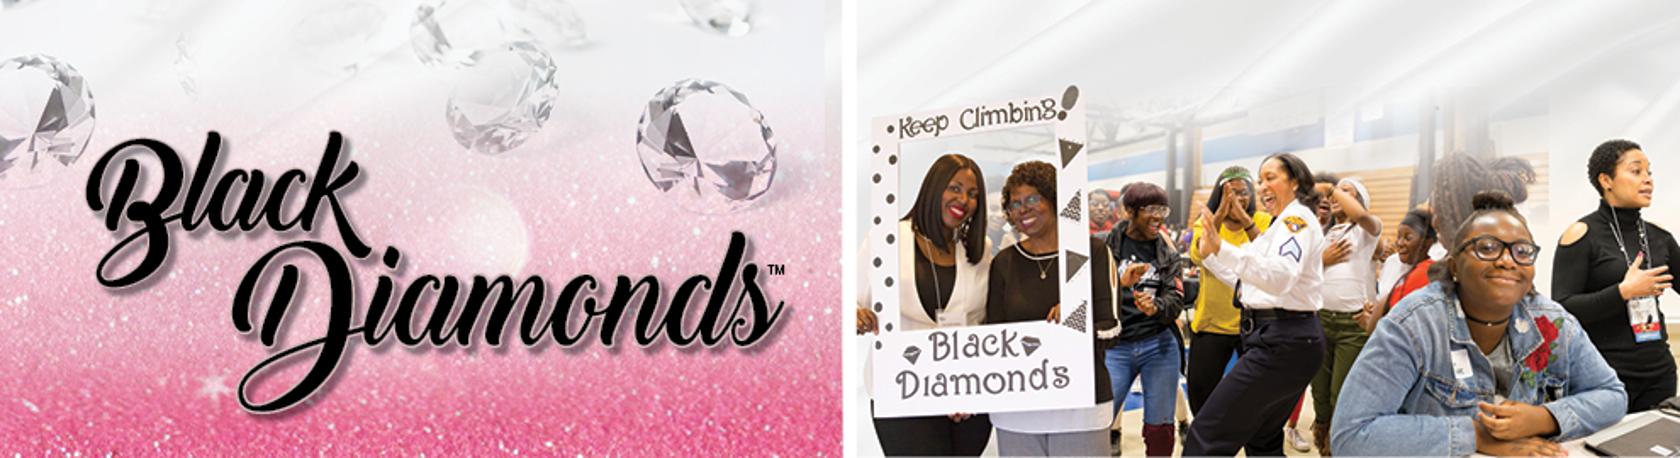 Black Diamonds Women's Conference Save the Date, Oct. 15-16, 2021